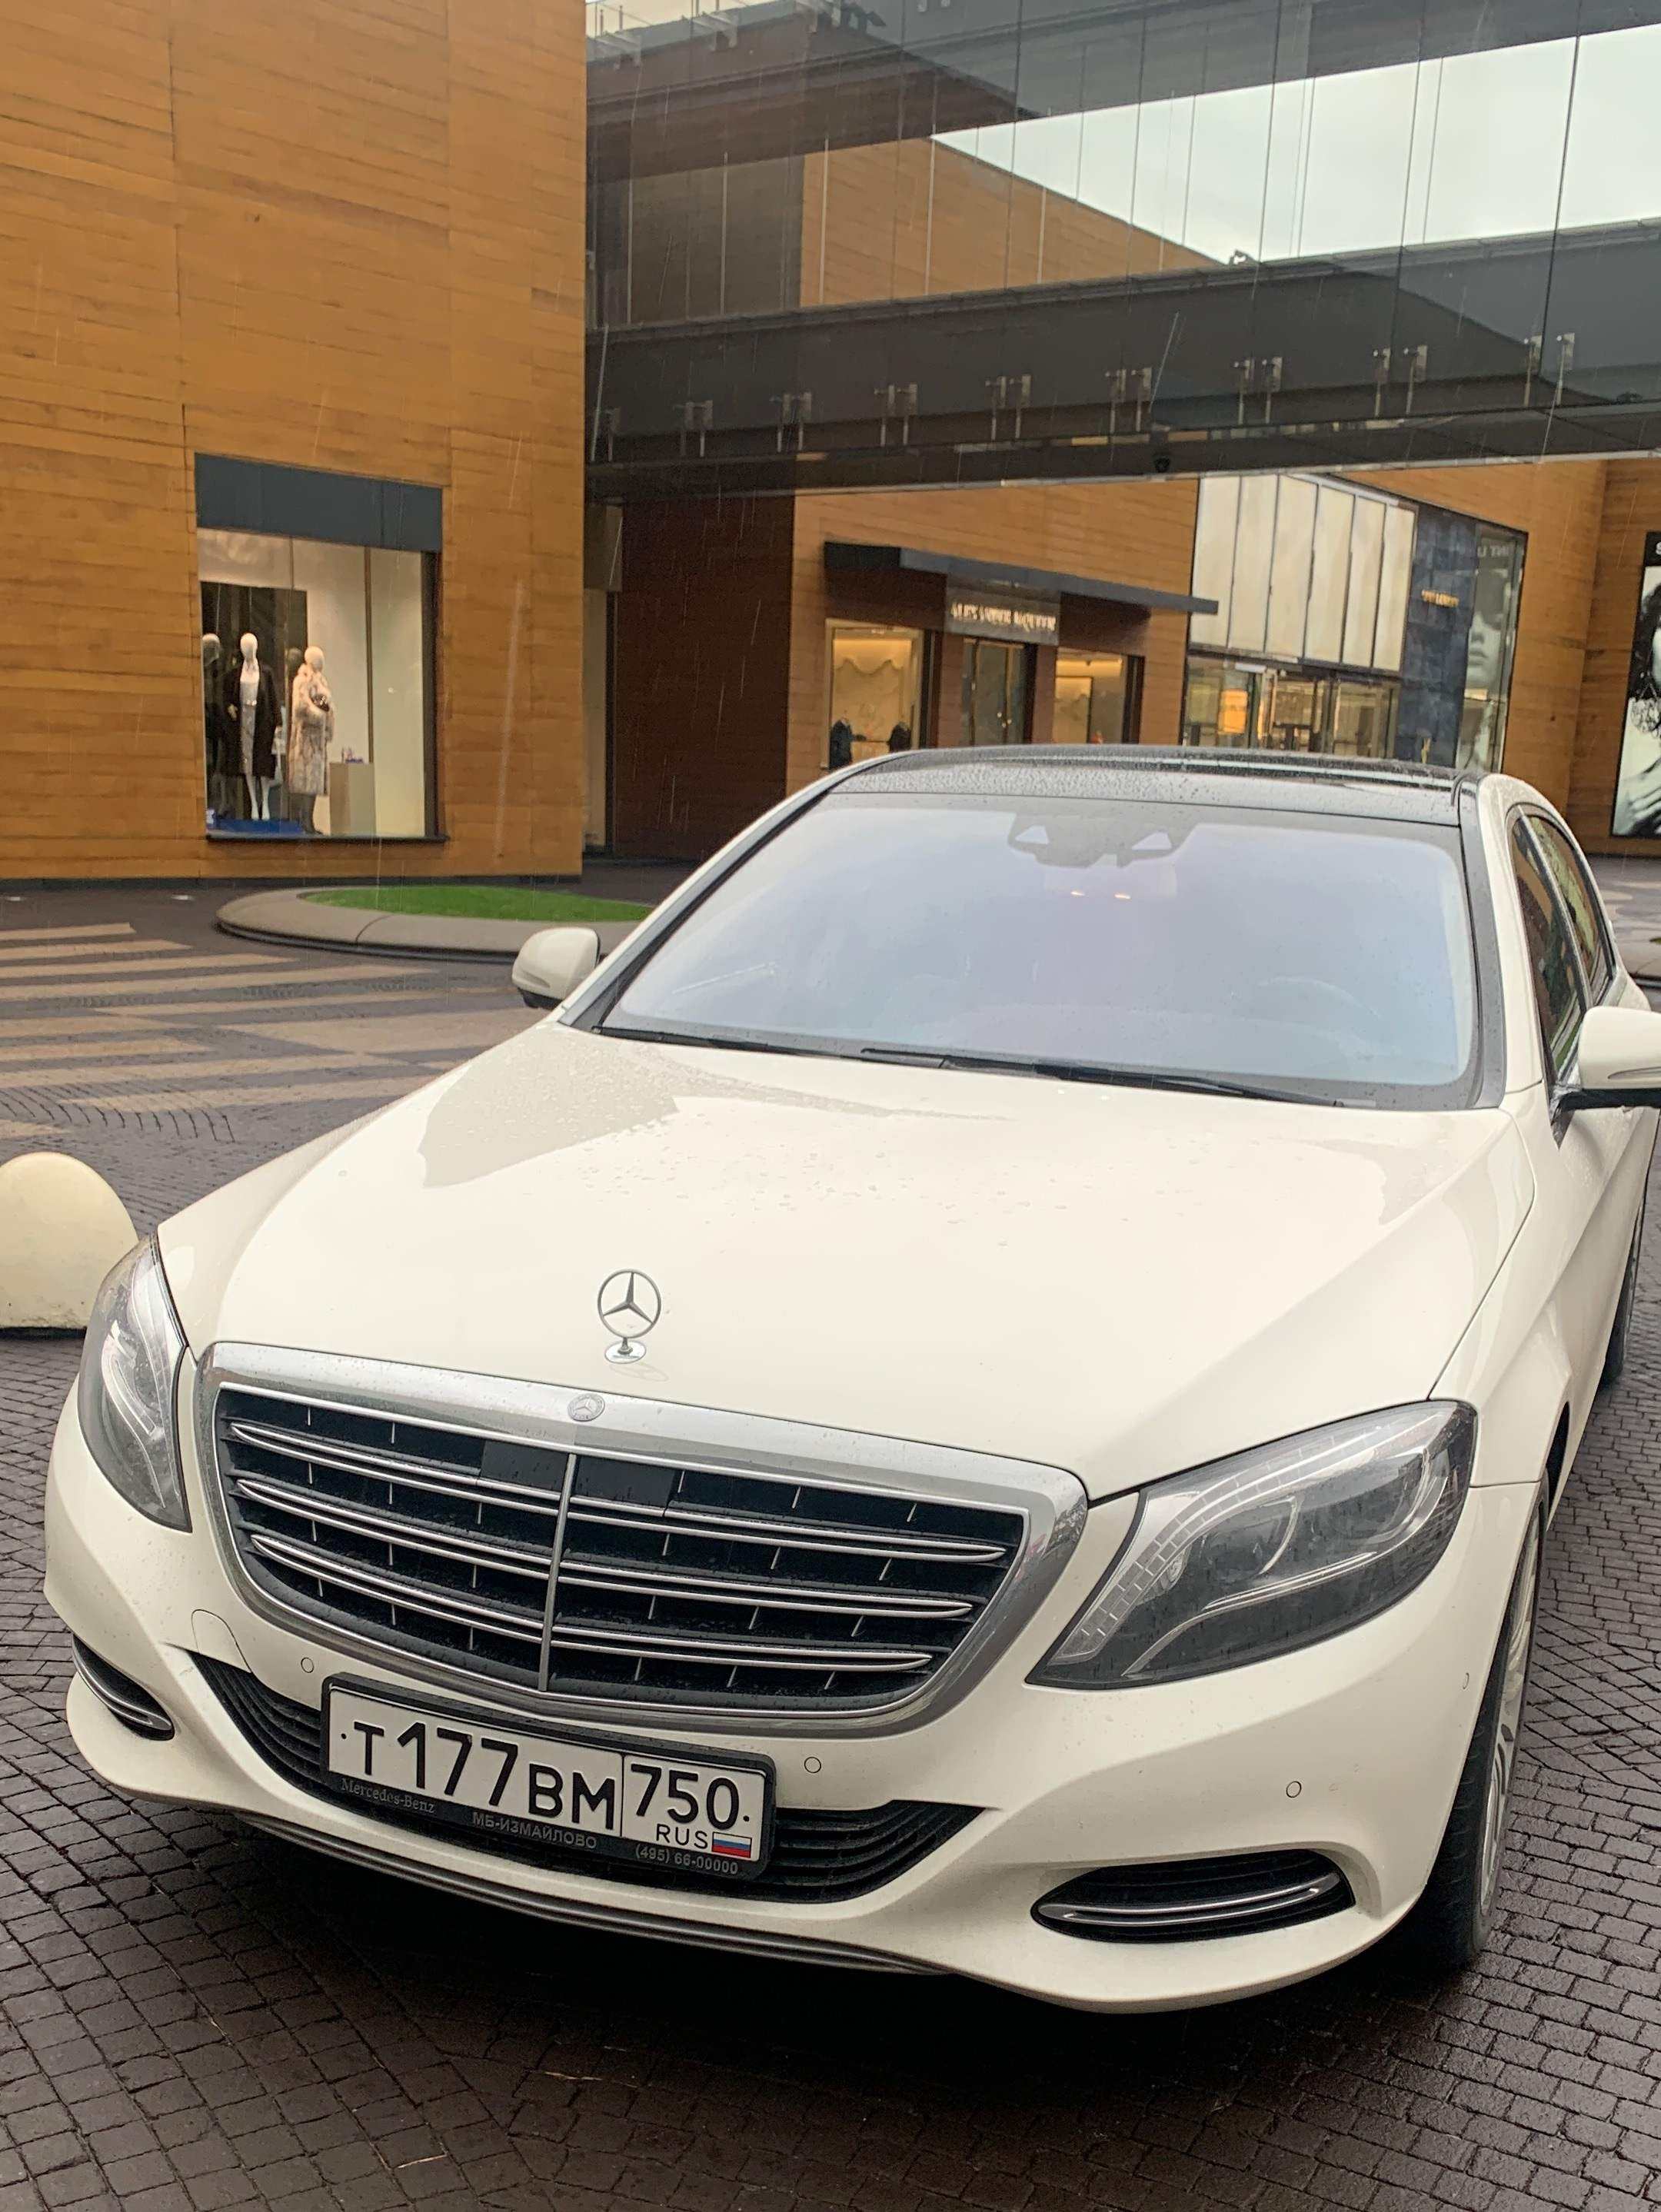 Mercedes Benz Maybach Барвиха Luxury Village